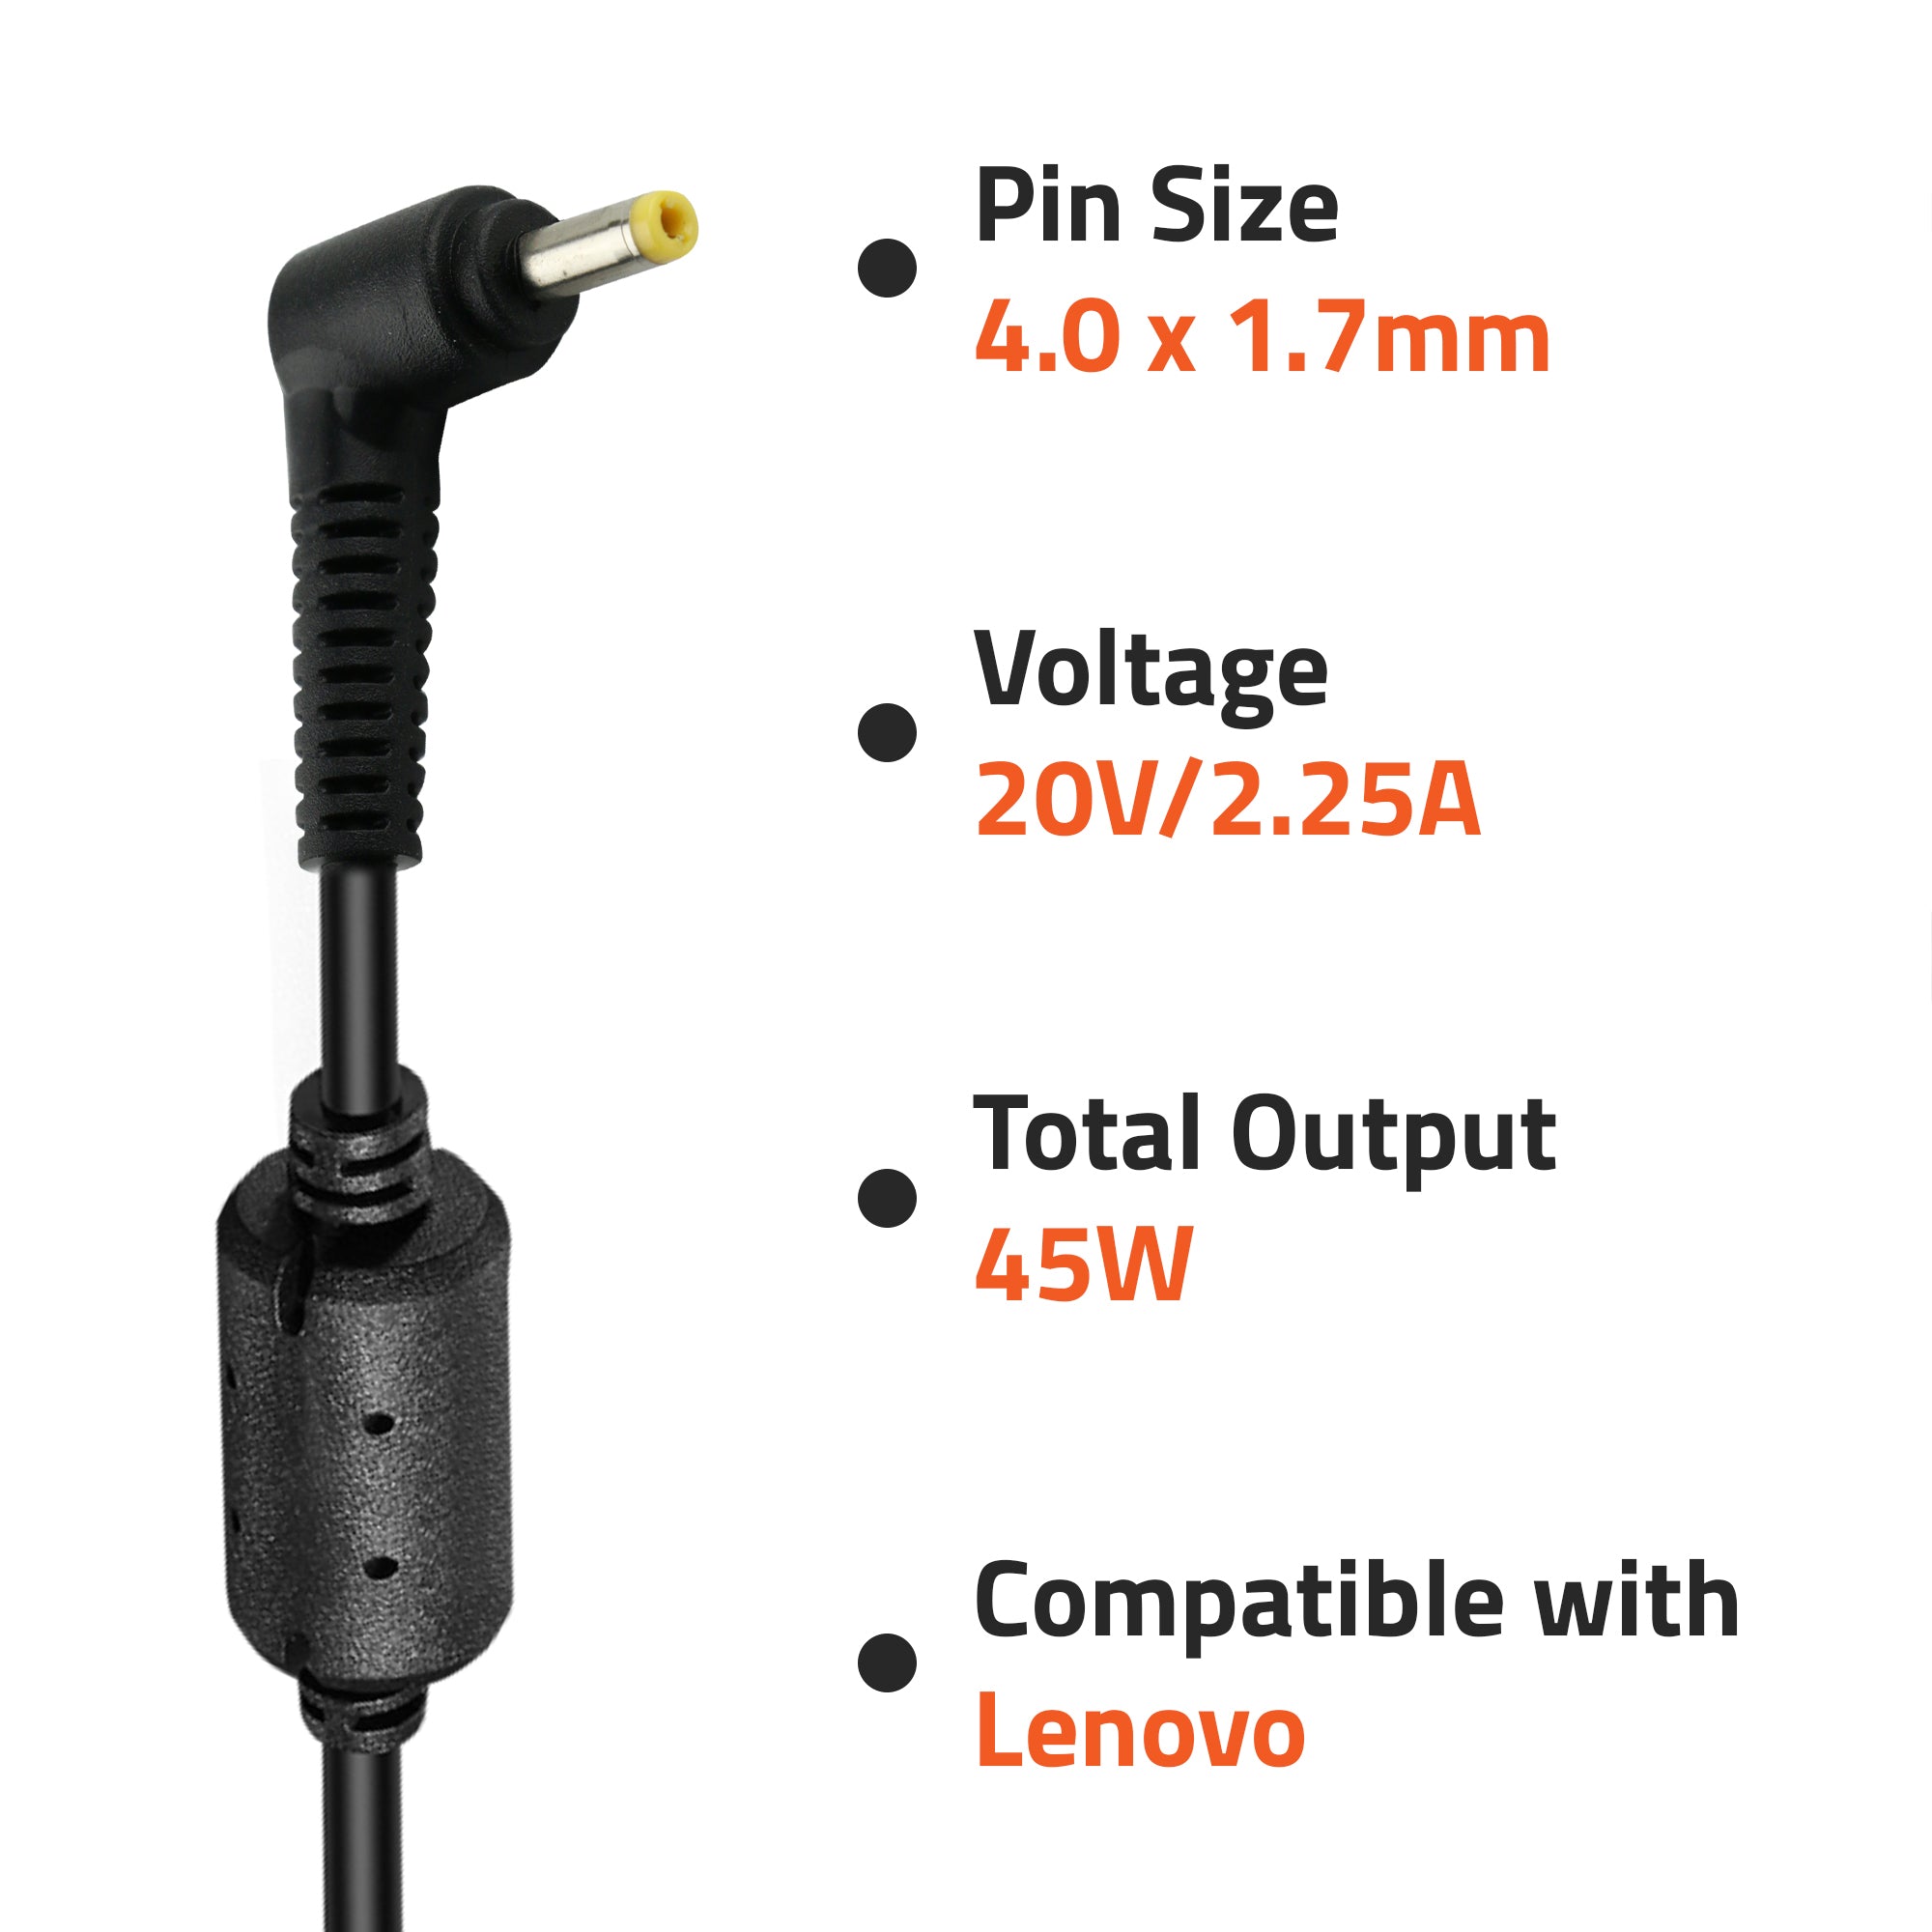 A0404 45Watt Laptop Adapter Compatible with Lenovo Laptops (20V/2.25A ,Pin: 4.0 x 1.7mm)